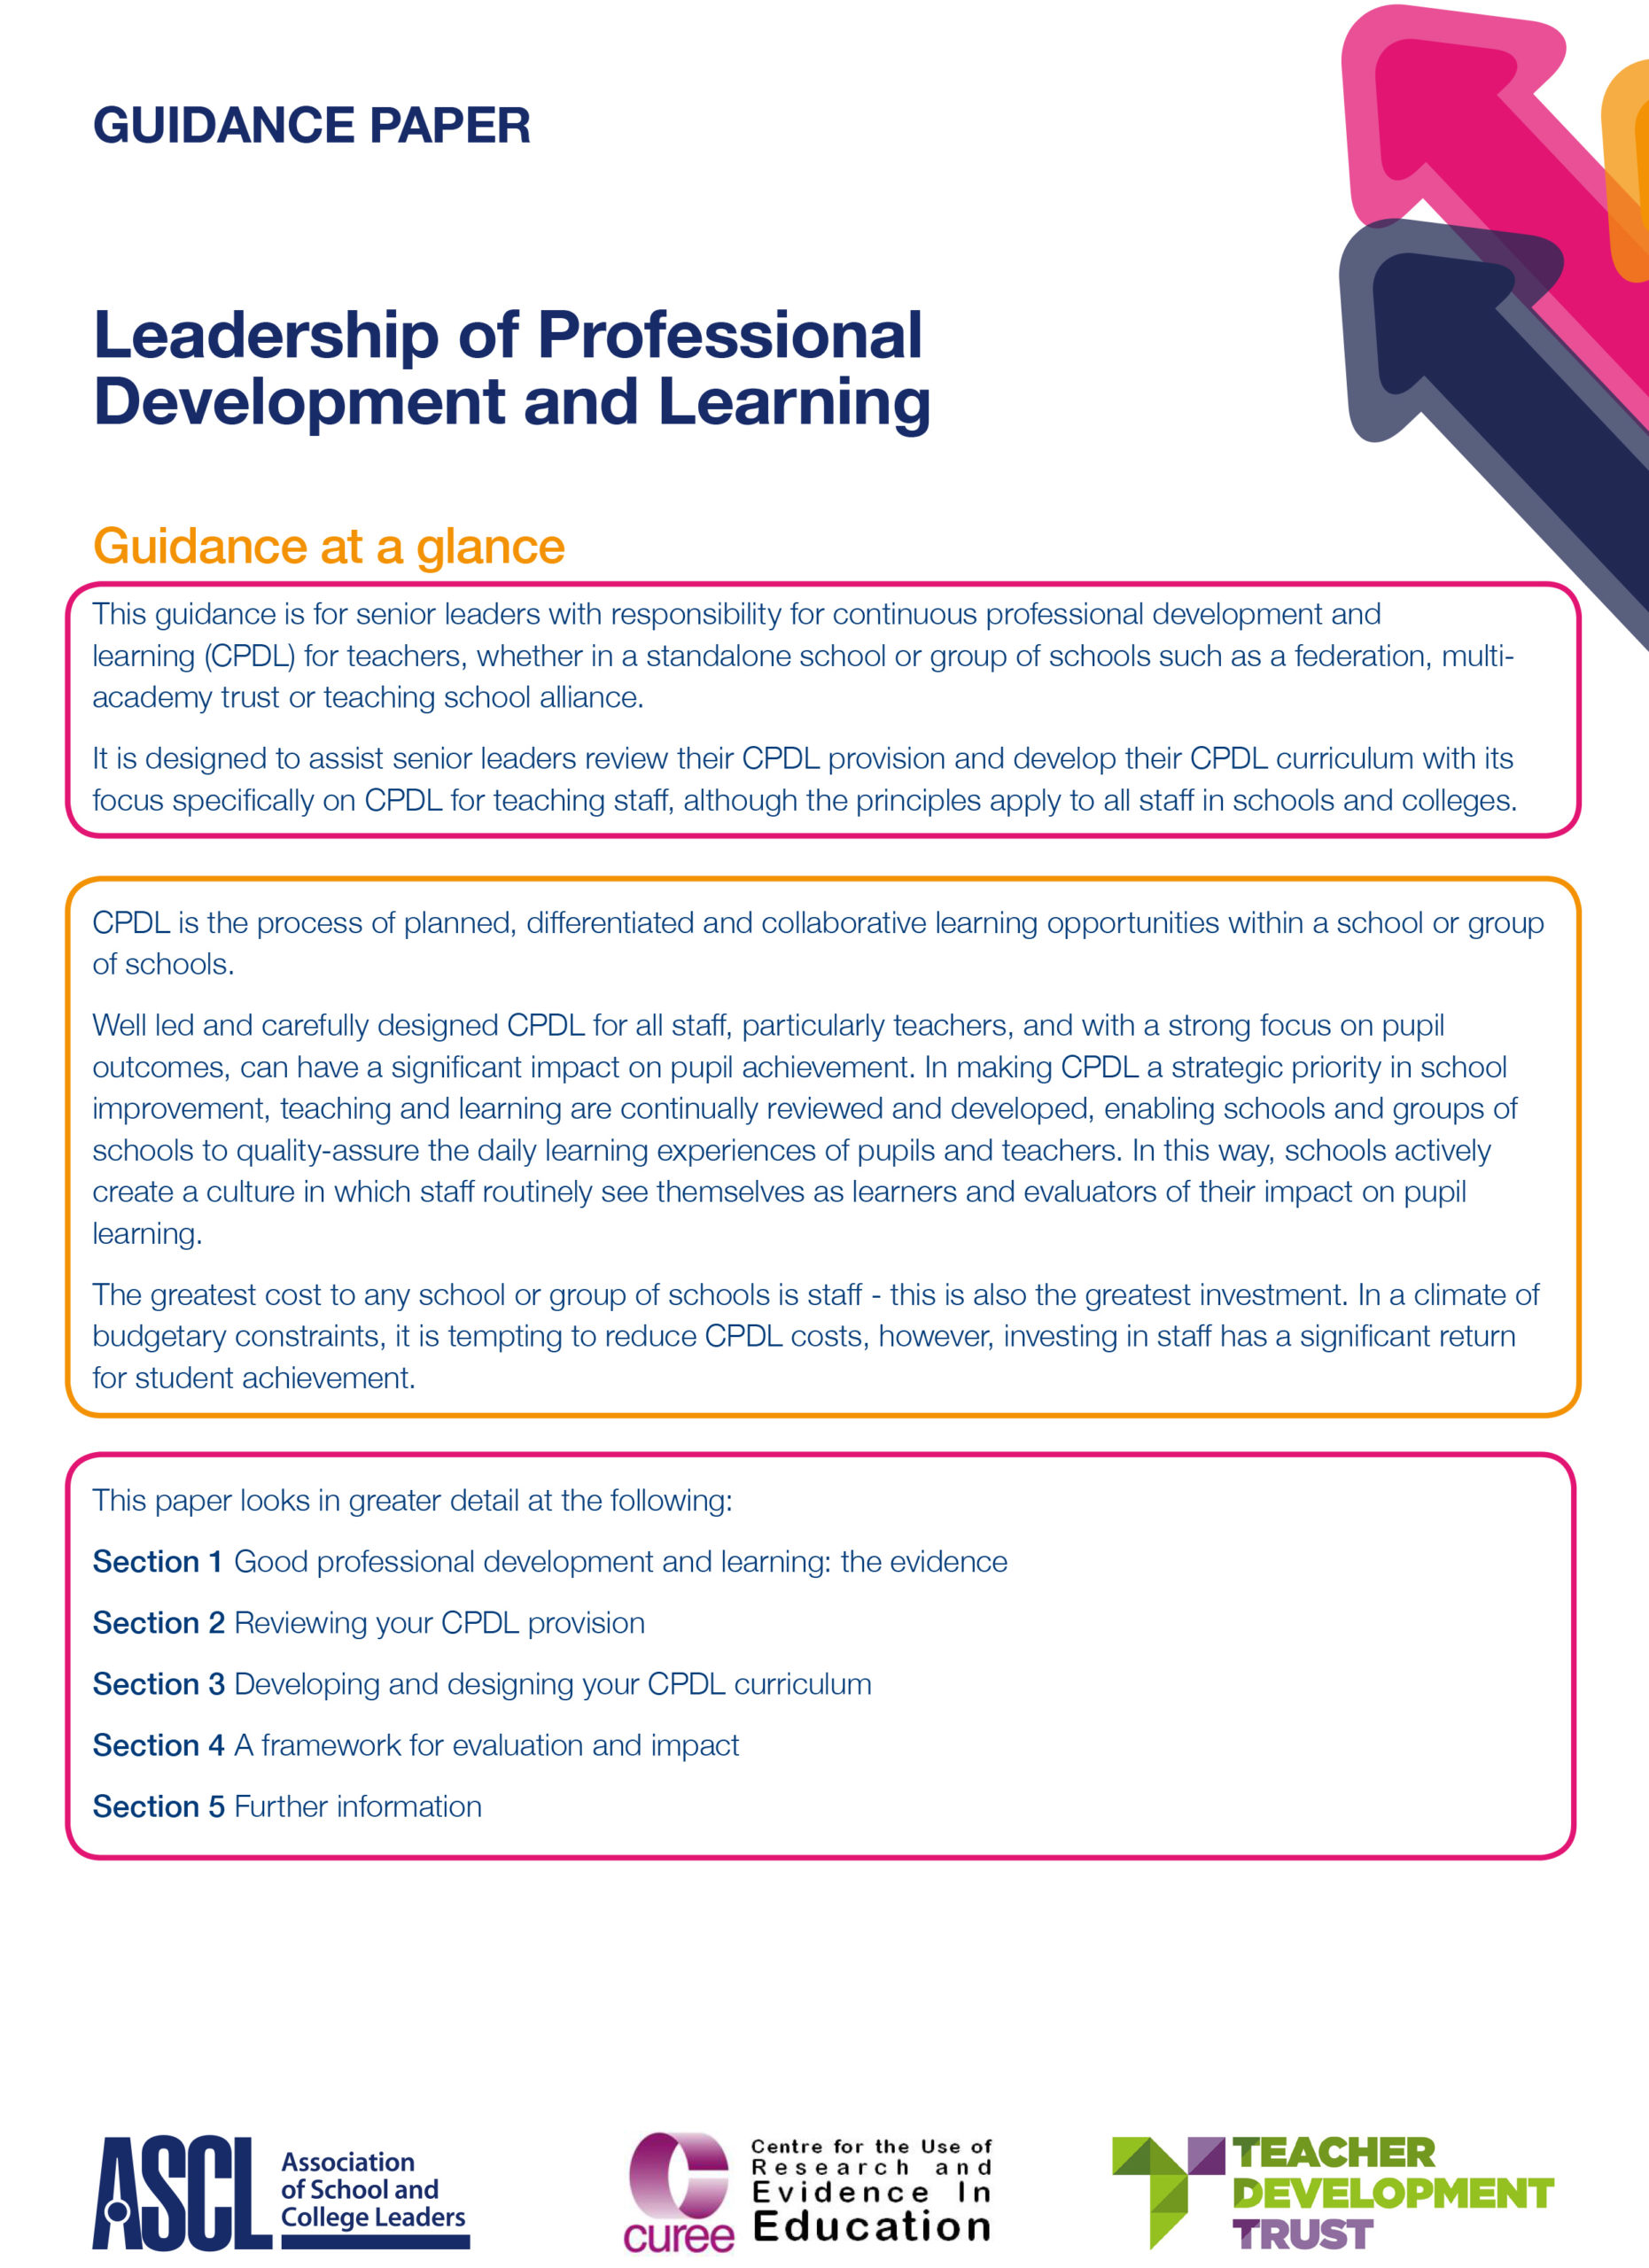 Guidance Paper - Leadership of Professional Development and Learning